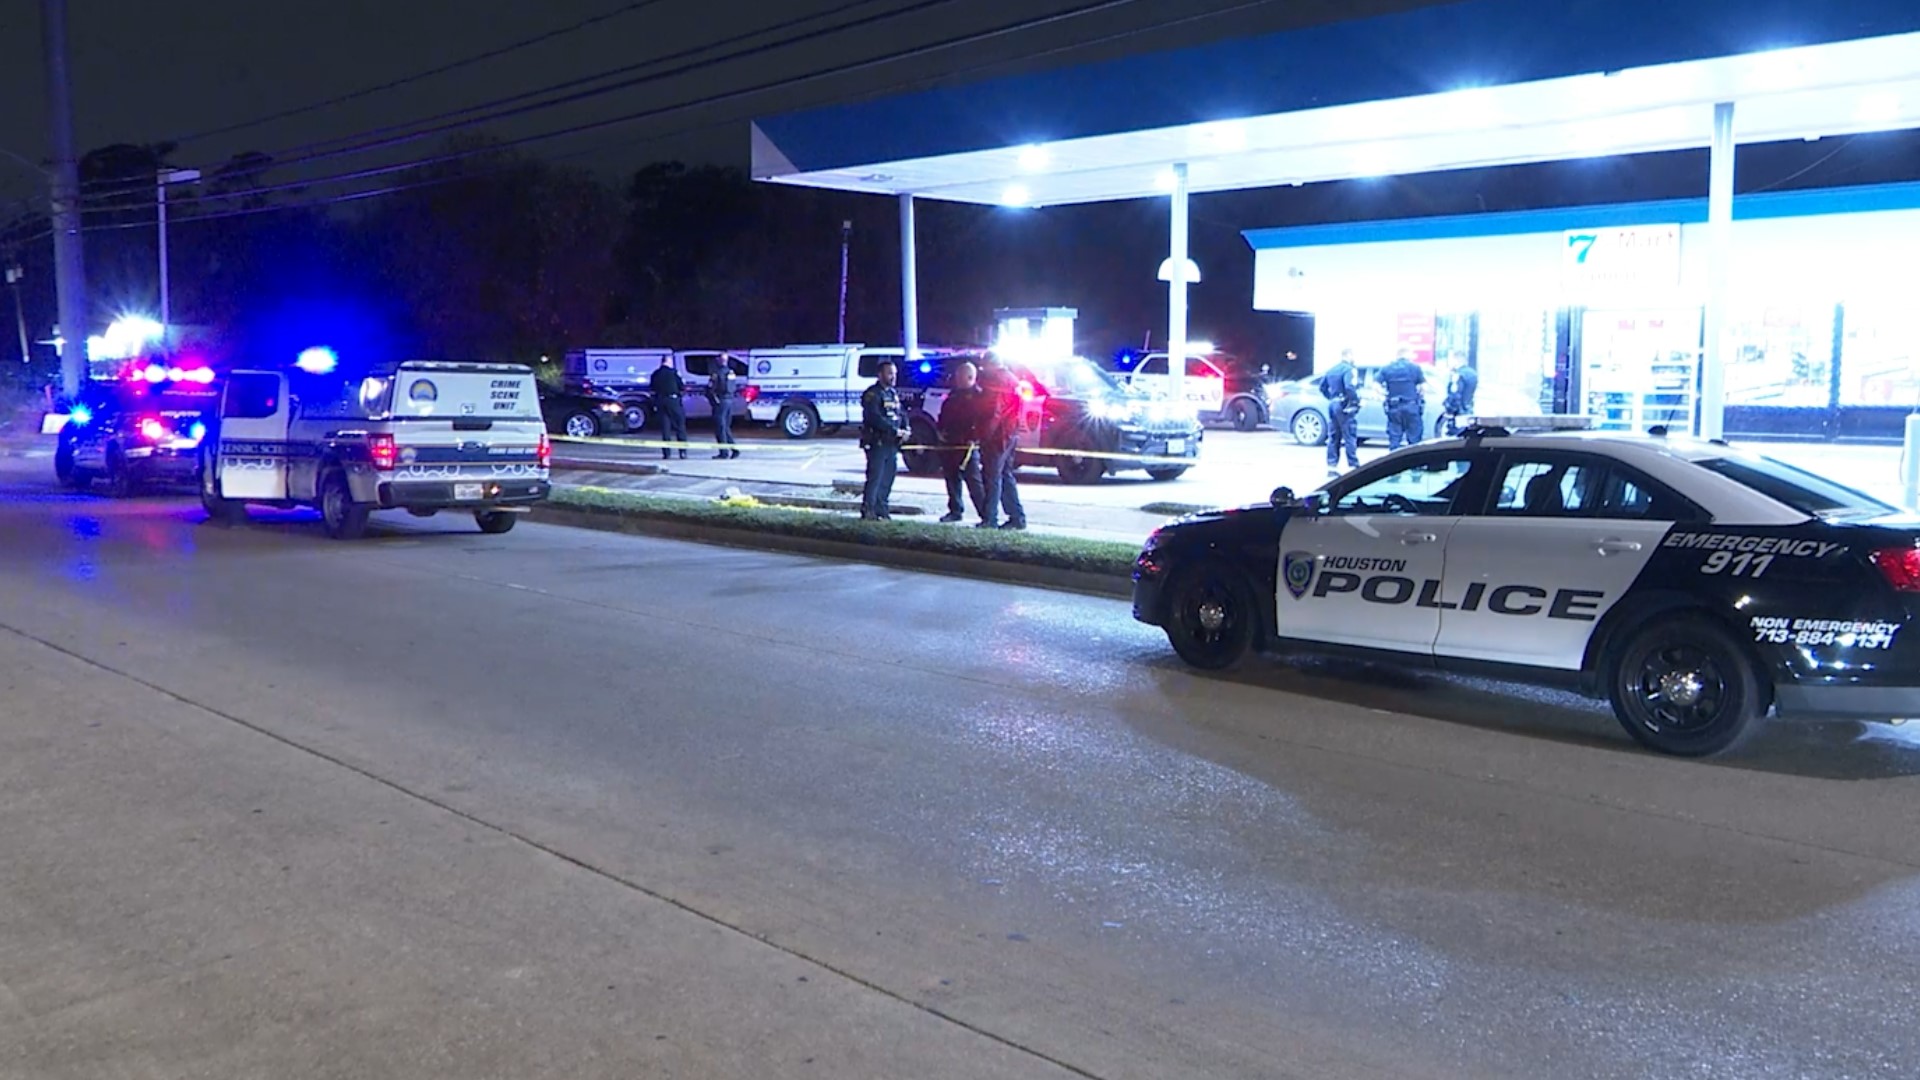 Houston Police Department officials said an officer shot a man on Sunday evening.